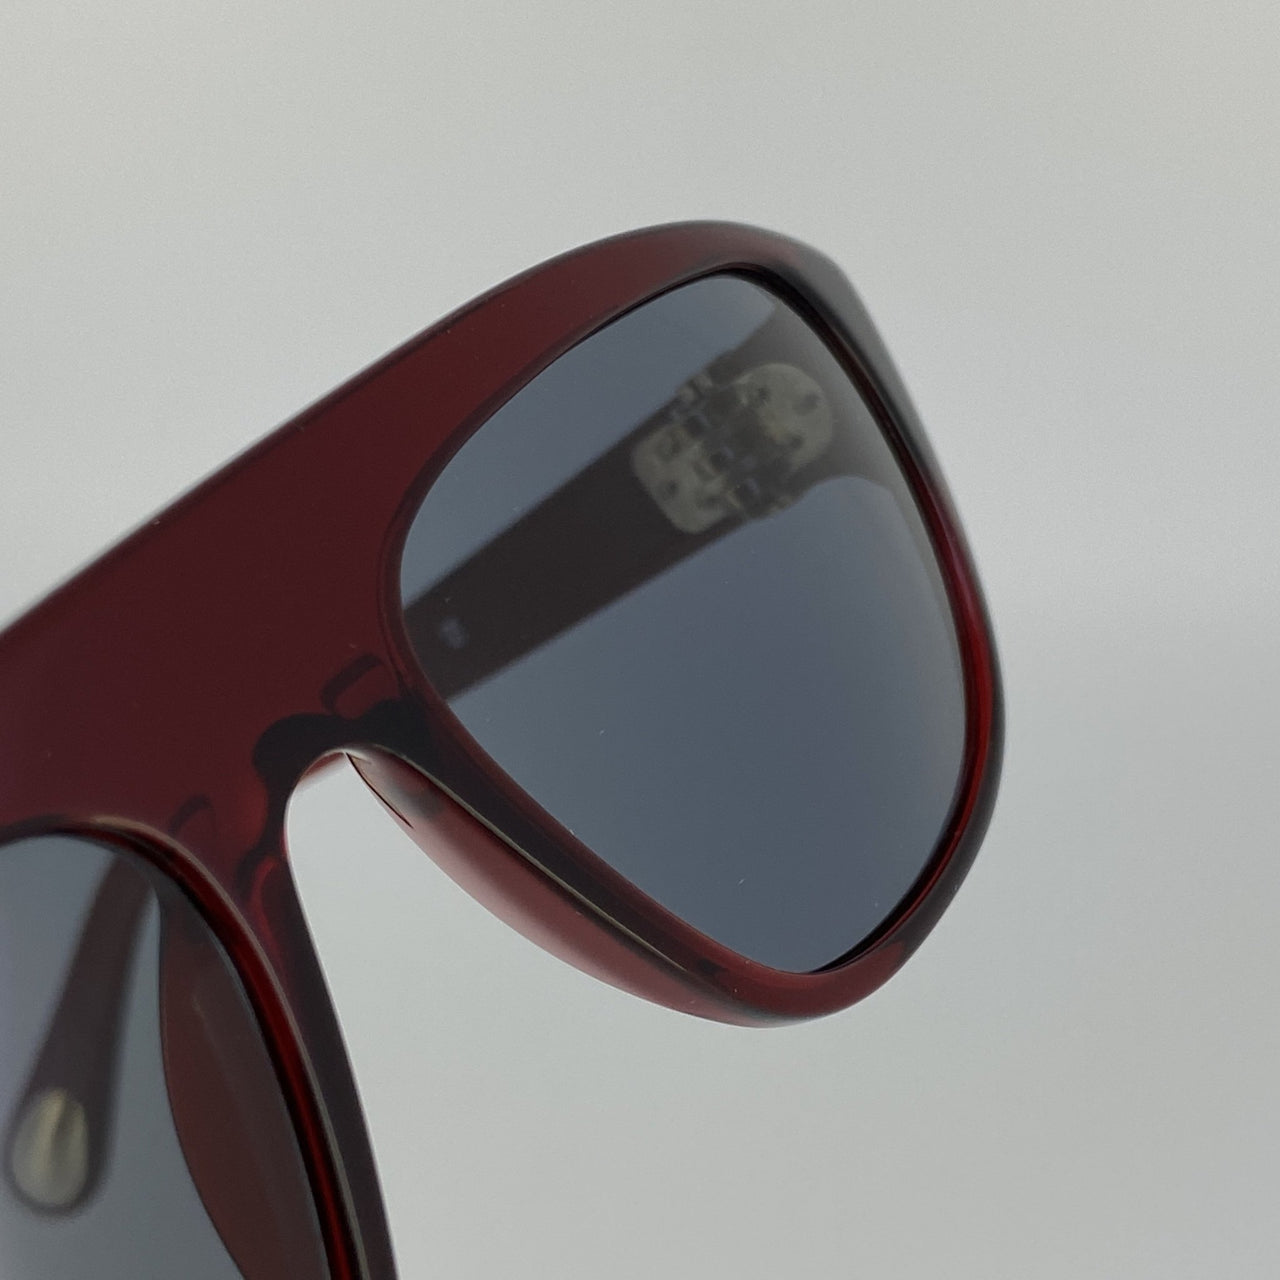 Ann Demeulemeester Sunglasses Bordeaux Red 925 Silver with Blue Lenses AD1C3SUN - Watches & Crystals